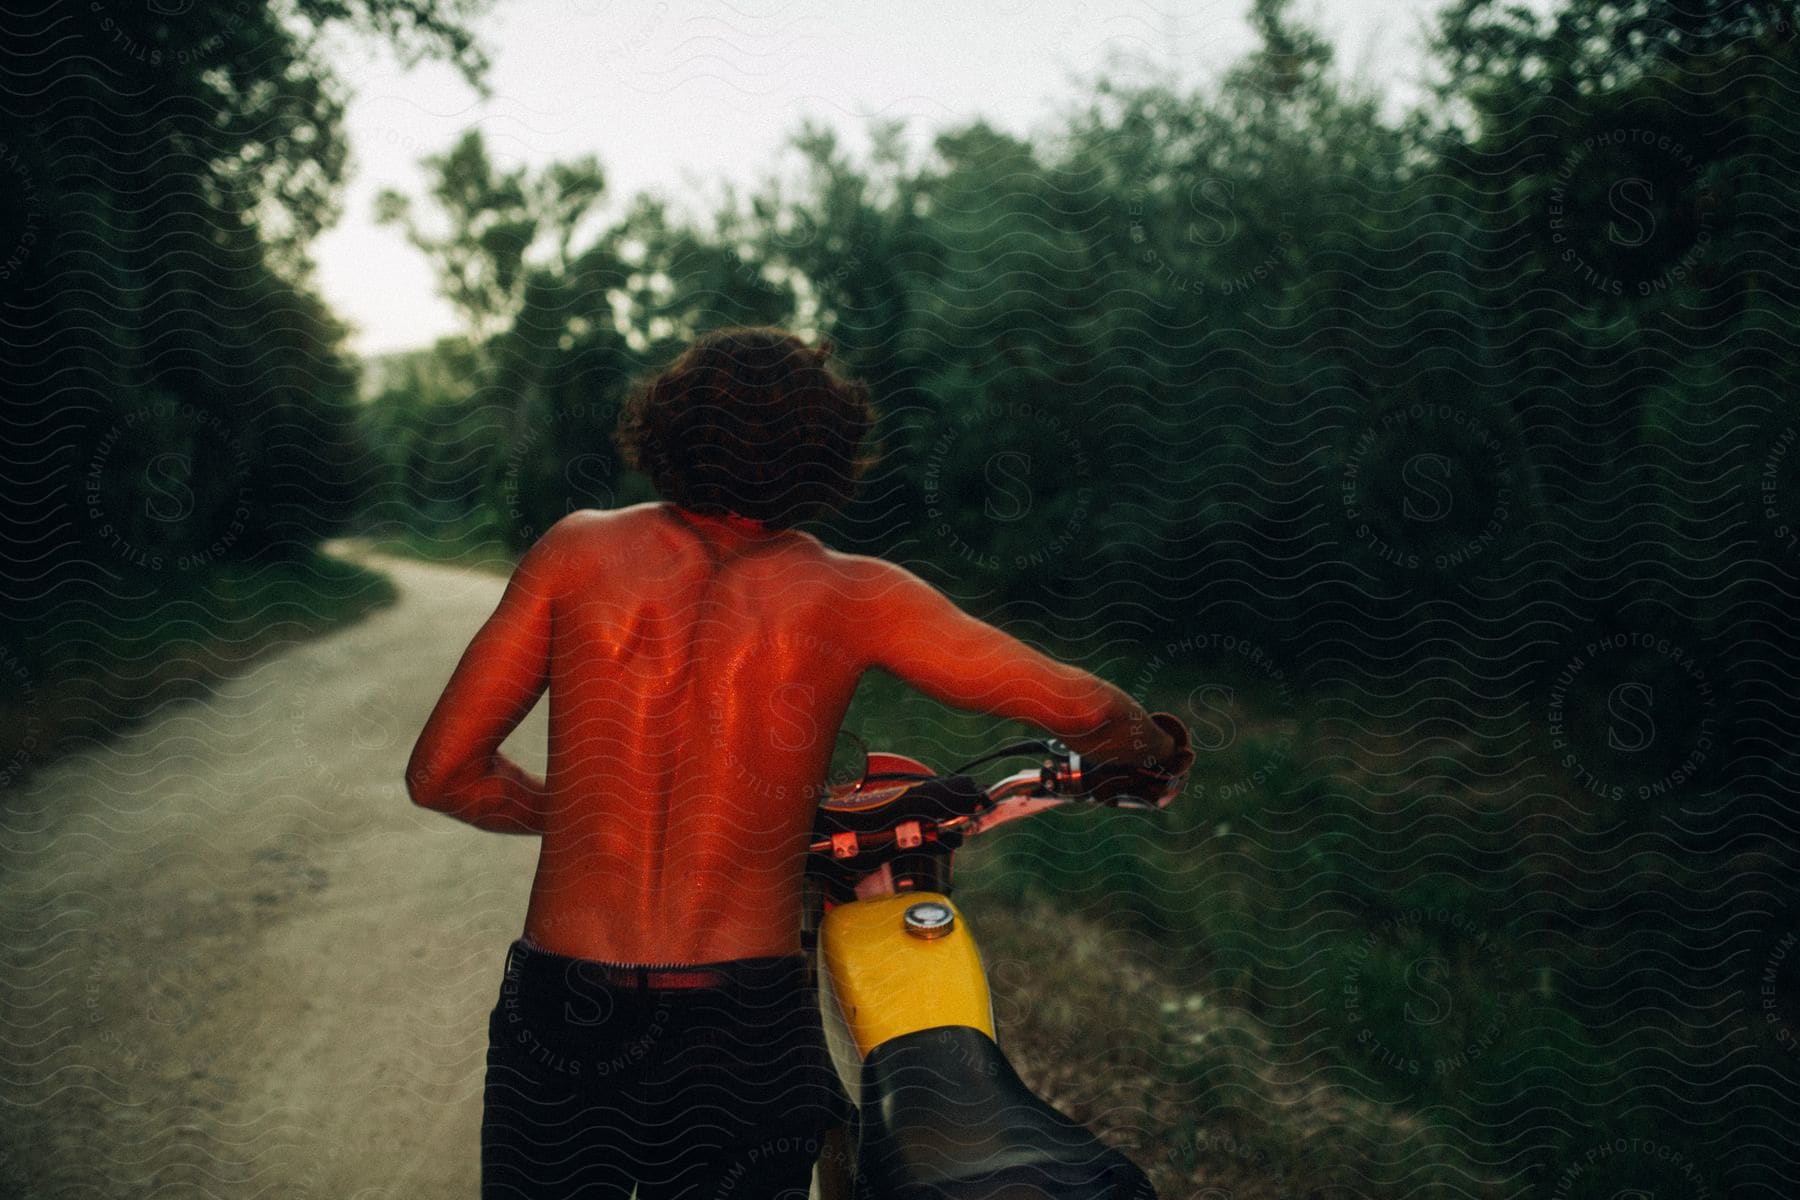 A man wearing no shirt is pushing a motorcycle on a road through the woods